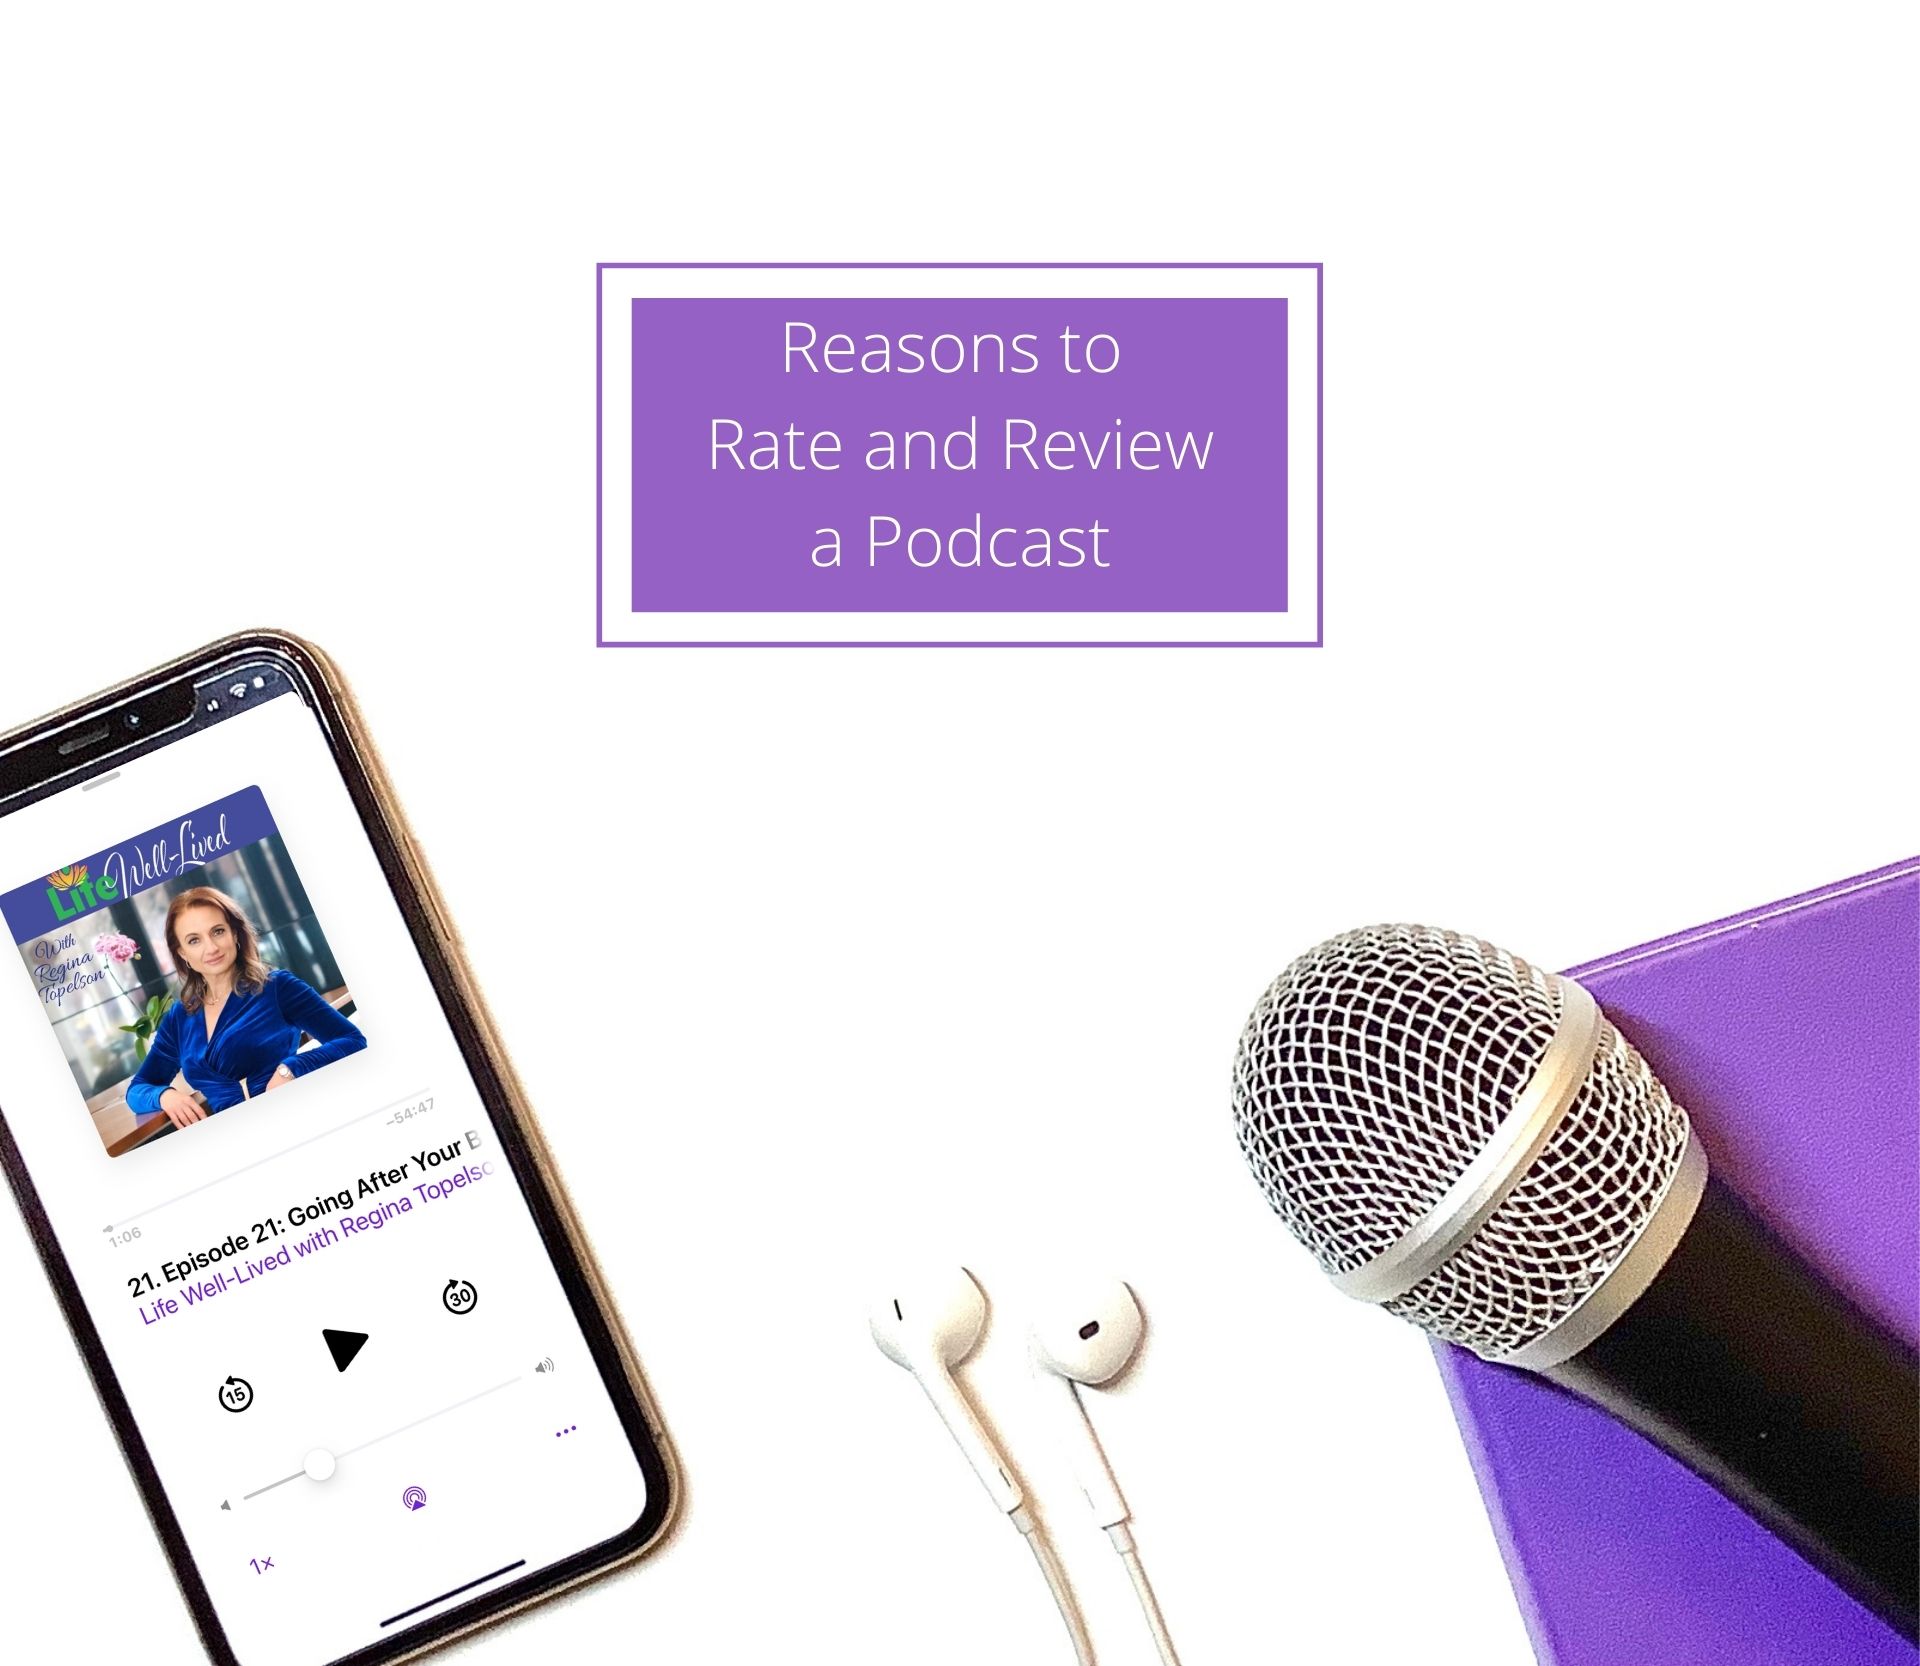 Reasons to Rate and Review a Podcast